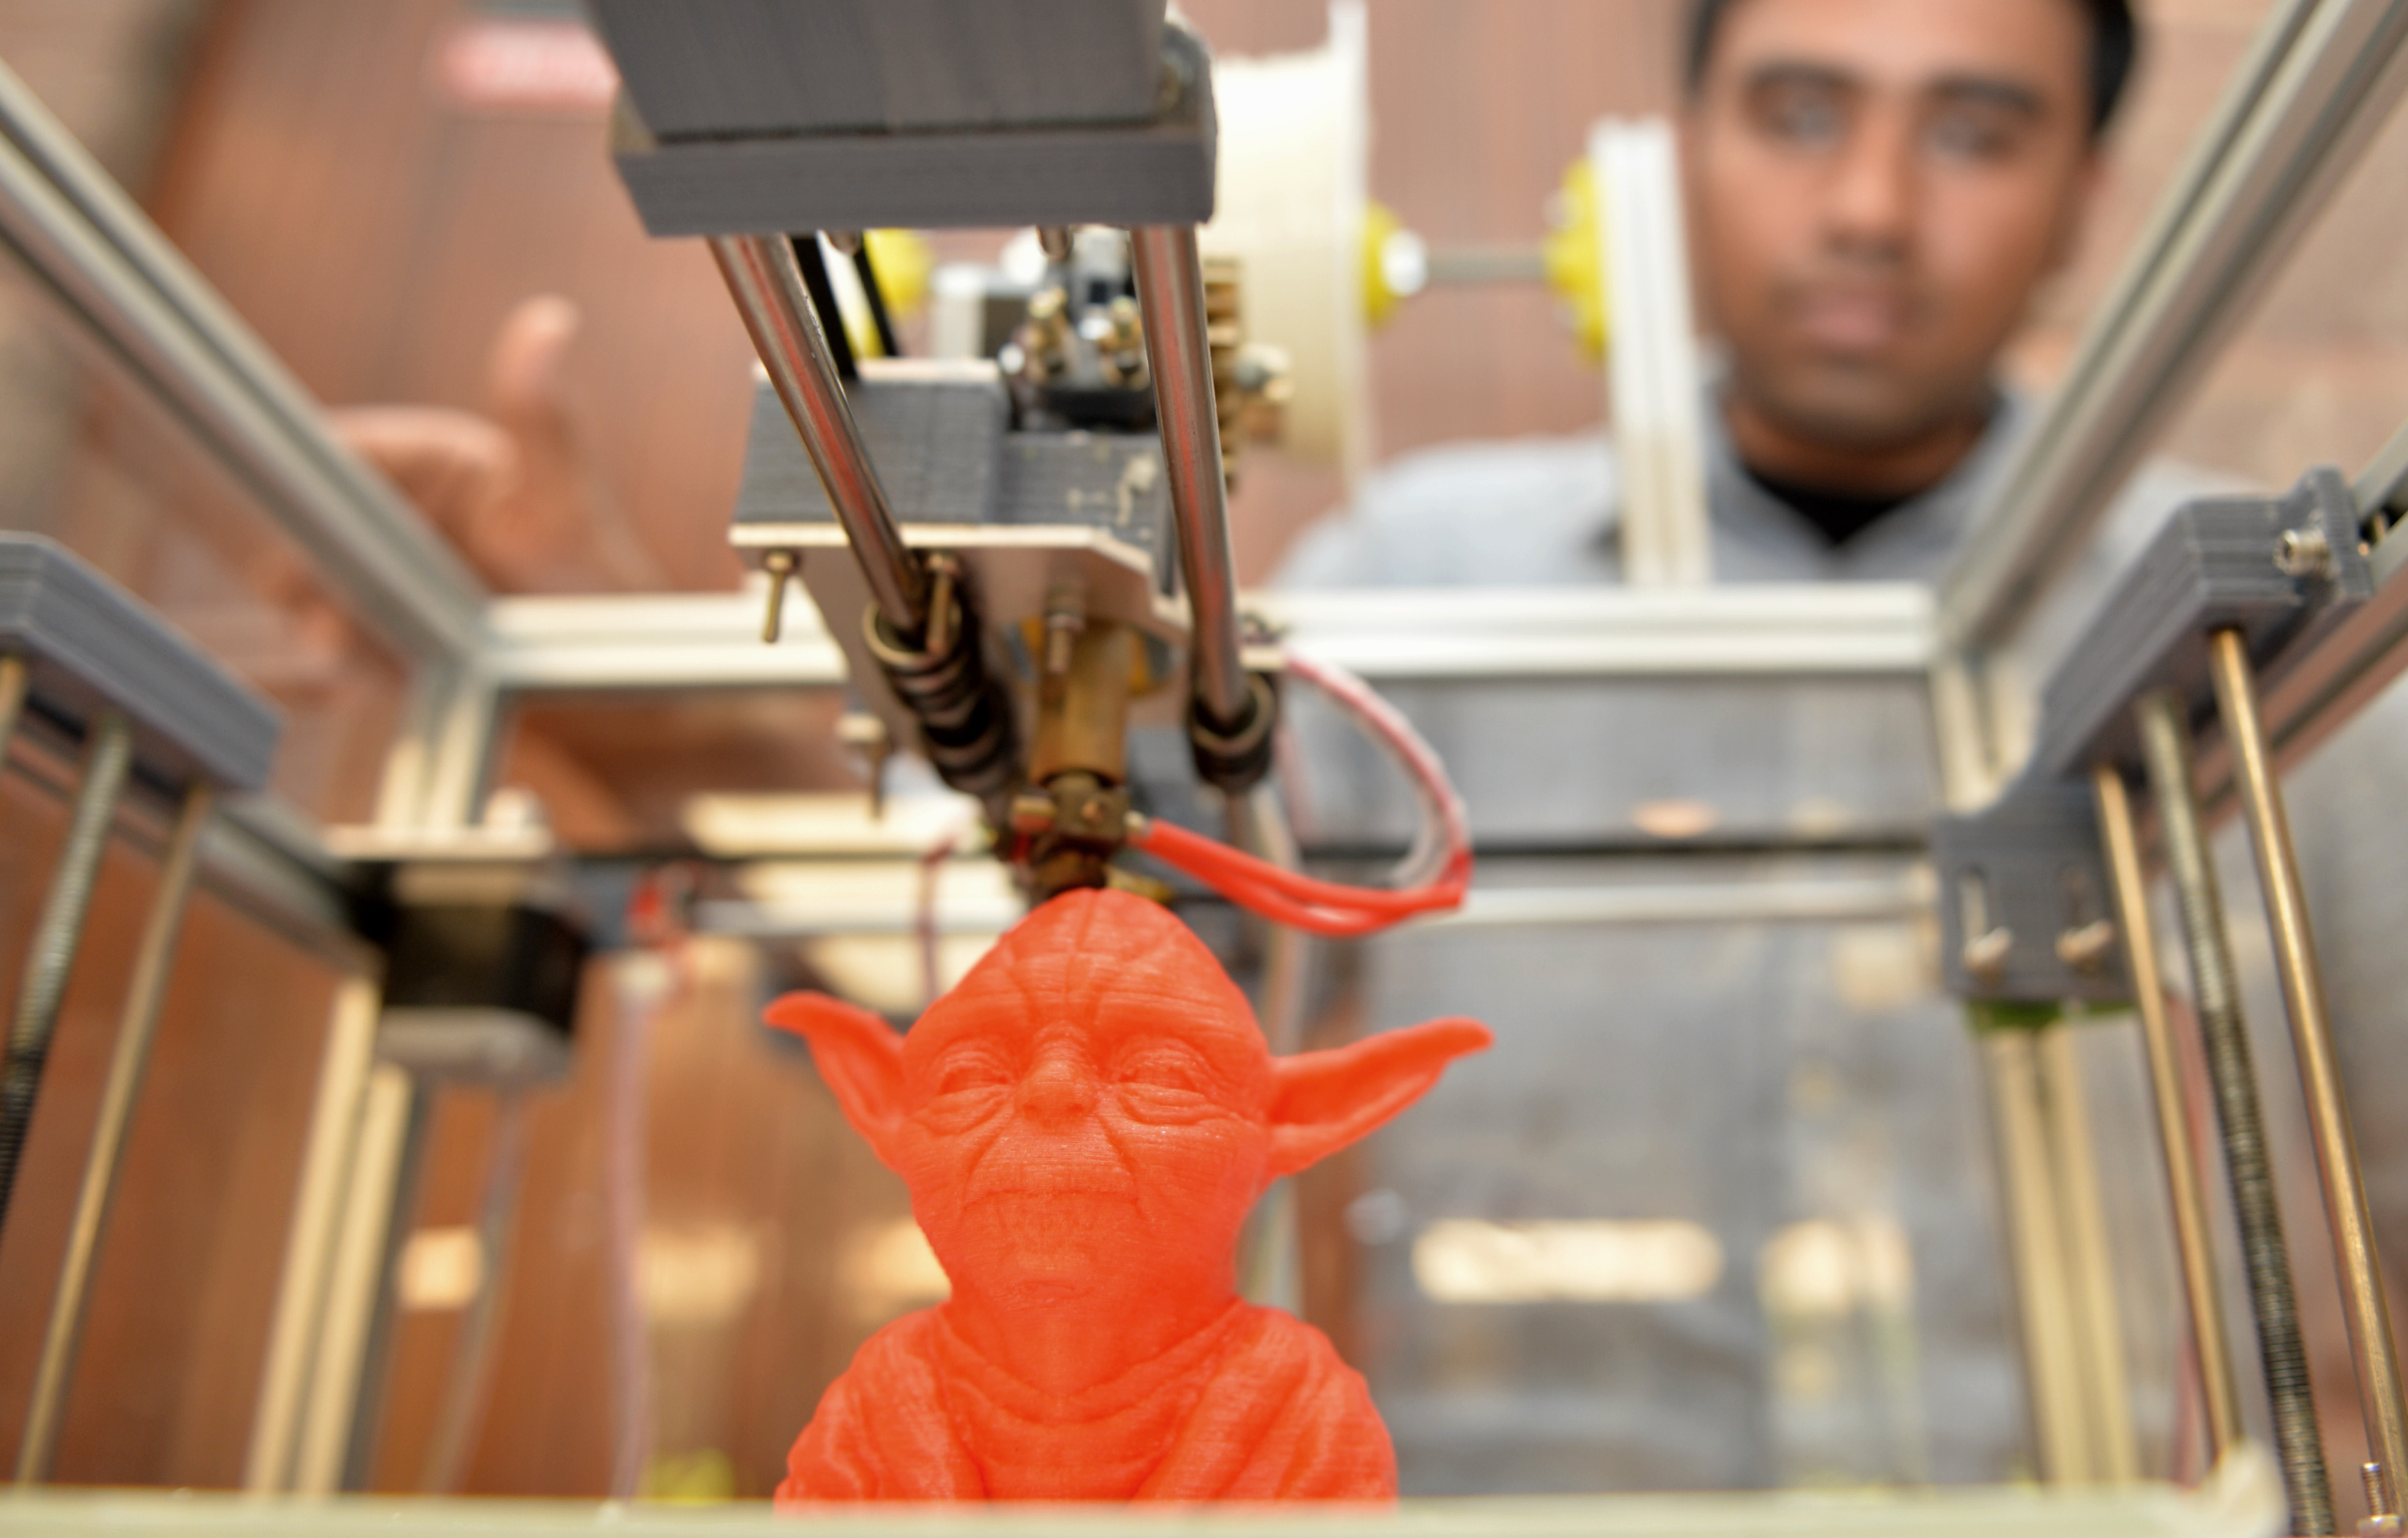 A bust of <i>Star Wars</i> film character Yoda is seen printed on a portable 3D printer during the Pravega 2014 science and technology festival at the Indian Institute of Science (IISc) in Bangalore on January 31, 2014. (AFP&mdash;AFP/Getty Images)